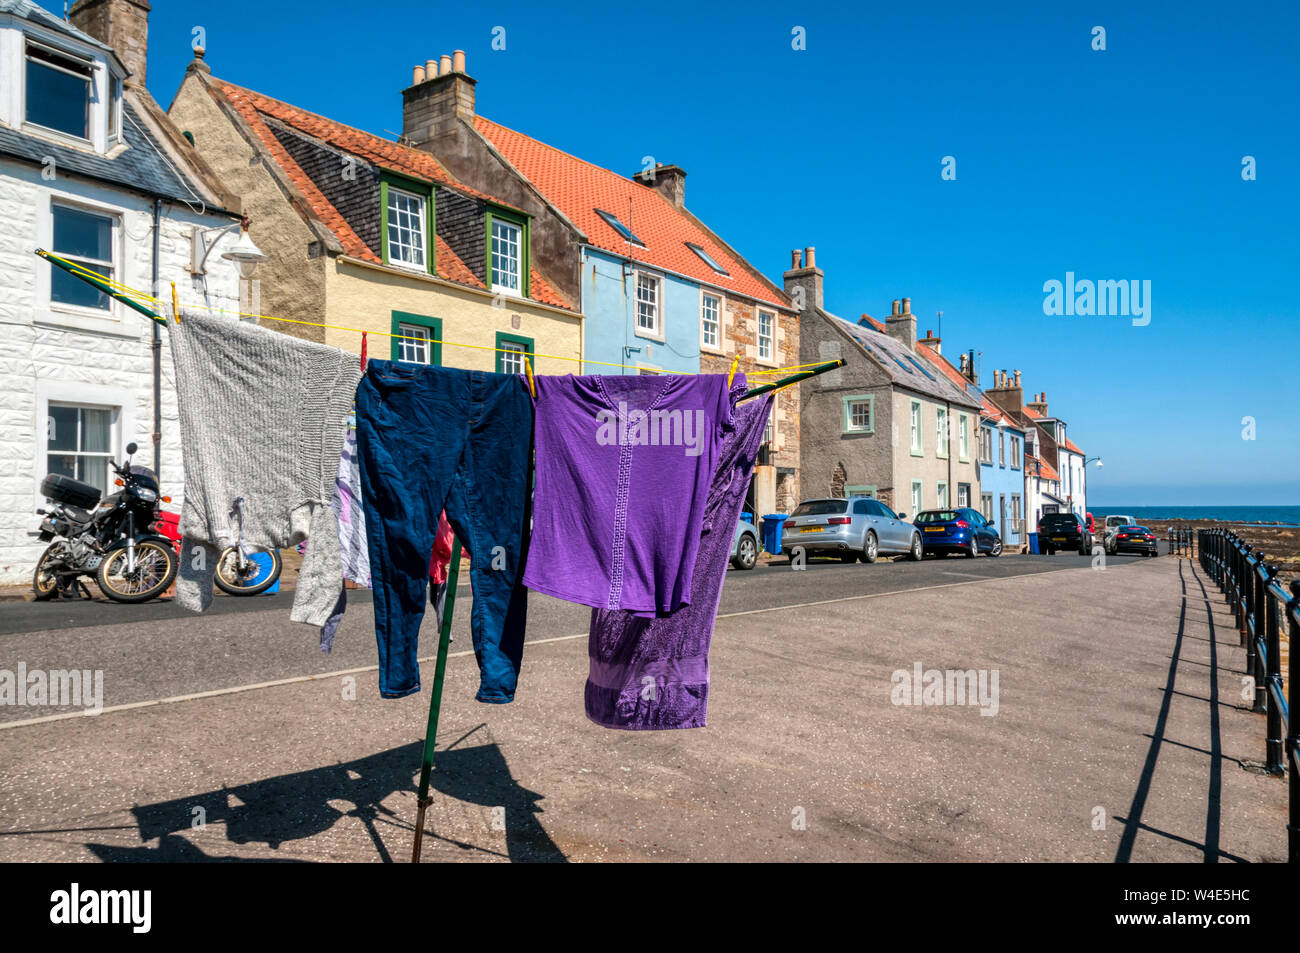 Washing drying on the seafront in the picturesque seaside village St Monans in the East Neuk of Fife, Scotland. Stock Photo